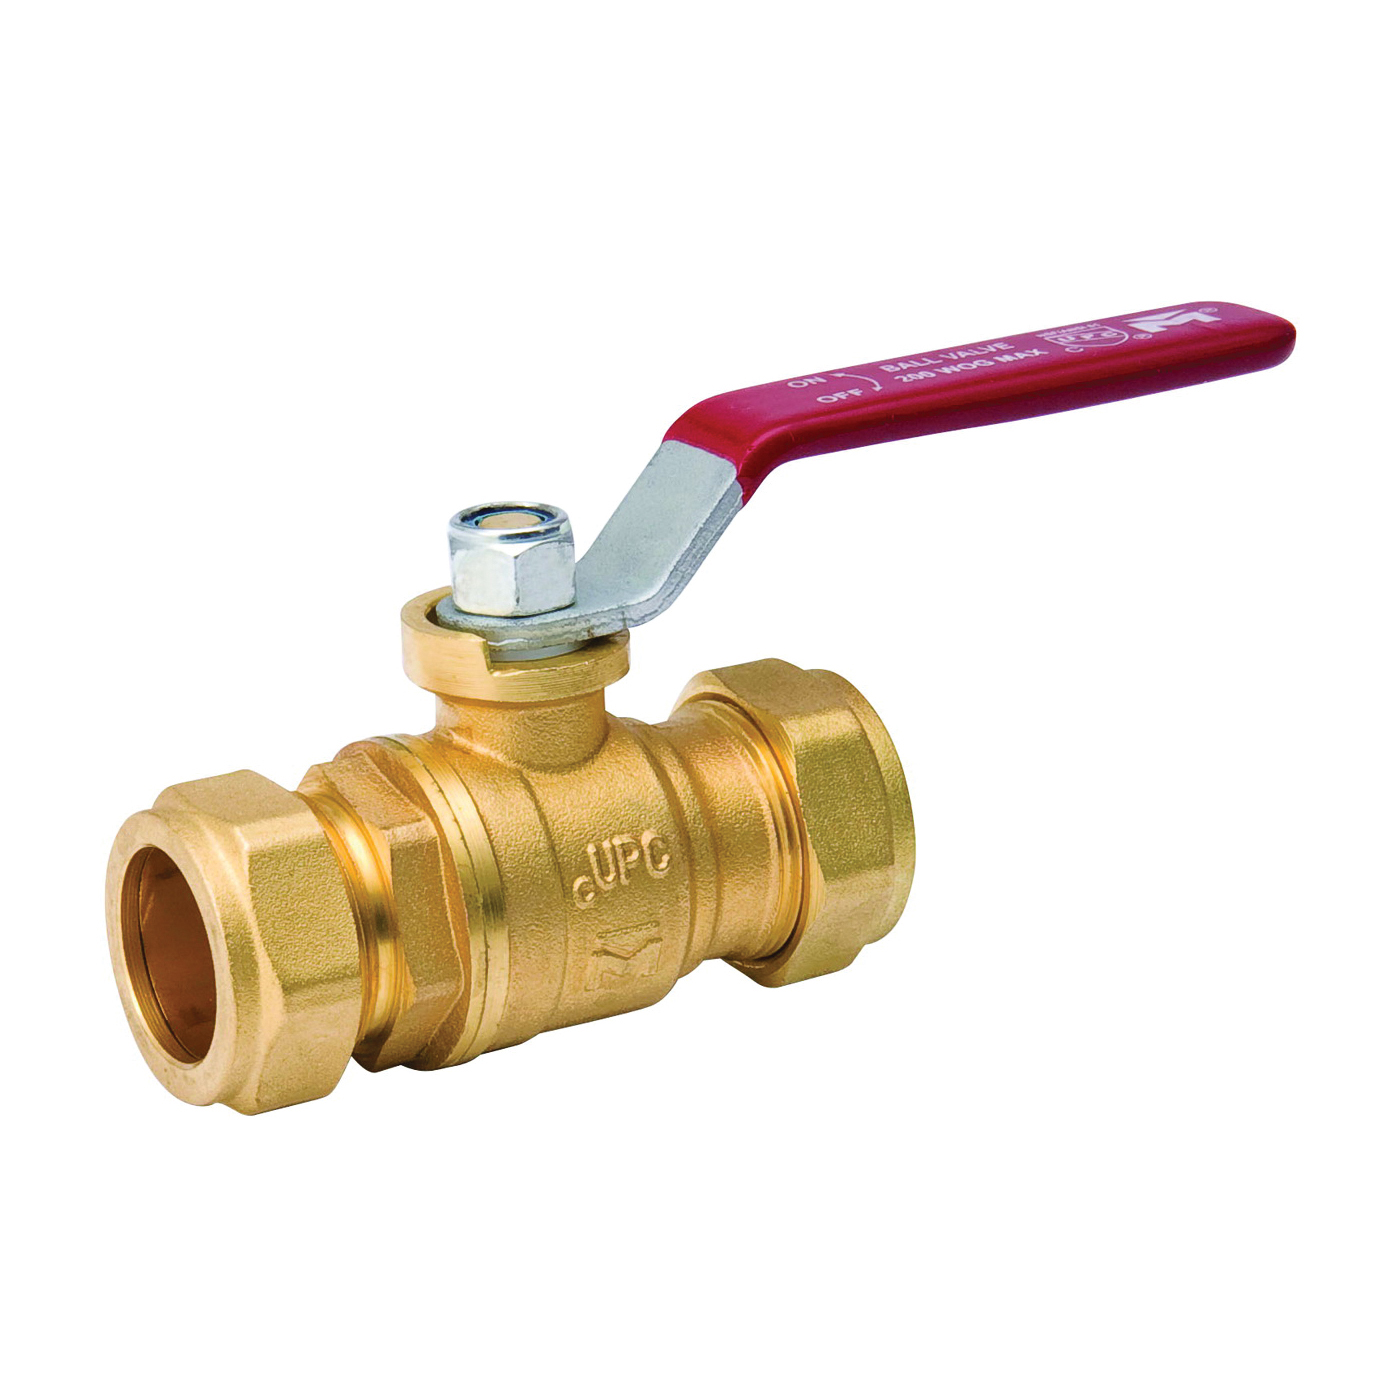 107-024NL Ball Valve, 3/4 in Connection, Compression, 200 psi Pressure, Manual Actuator, Brass Body